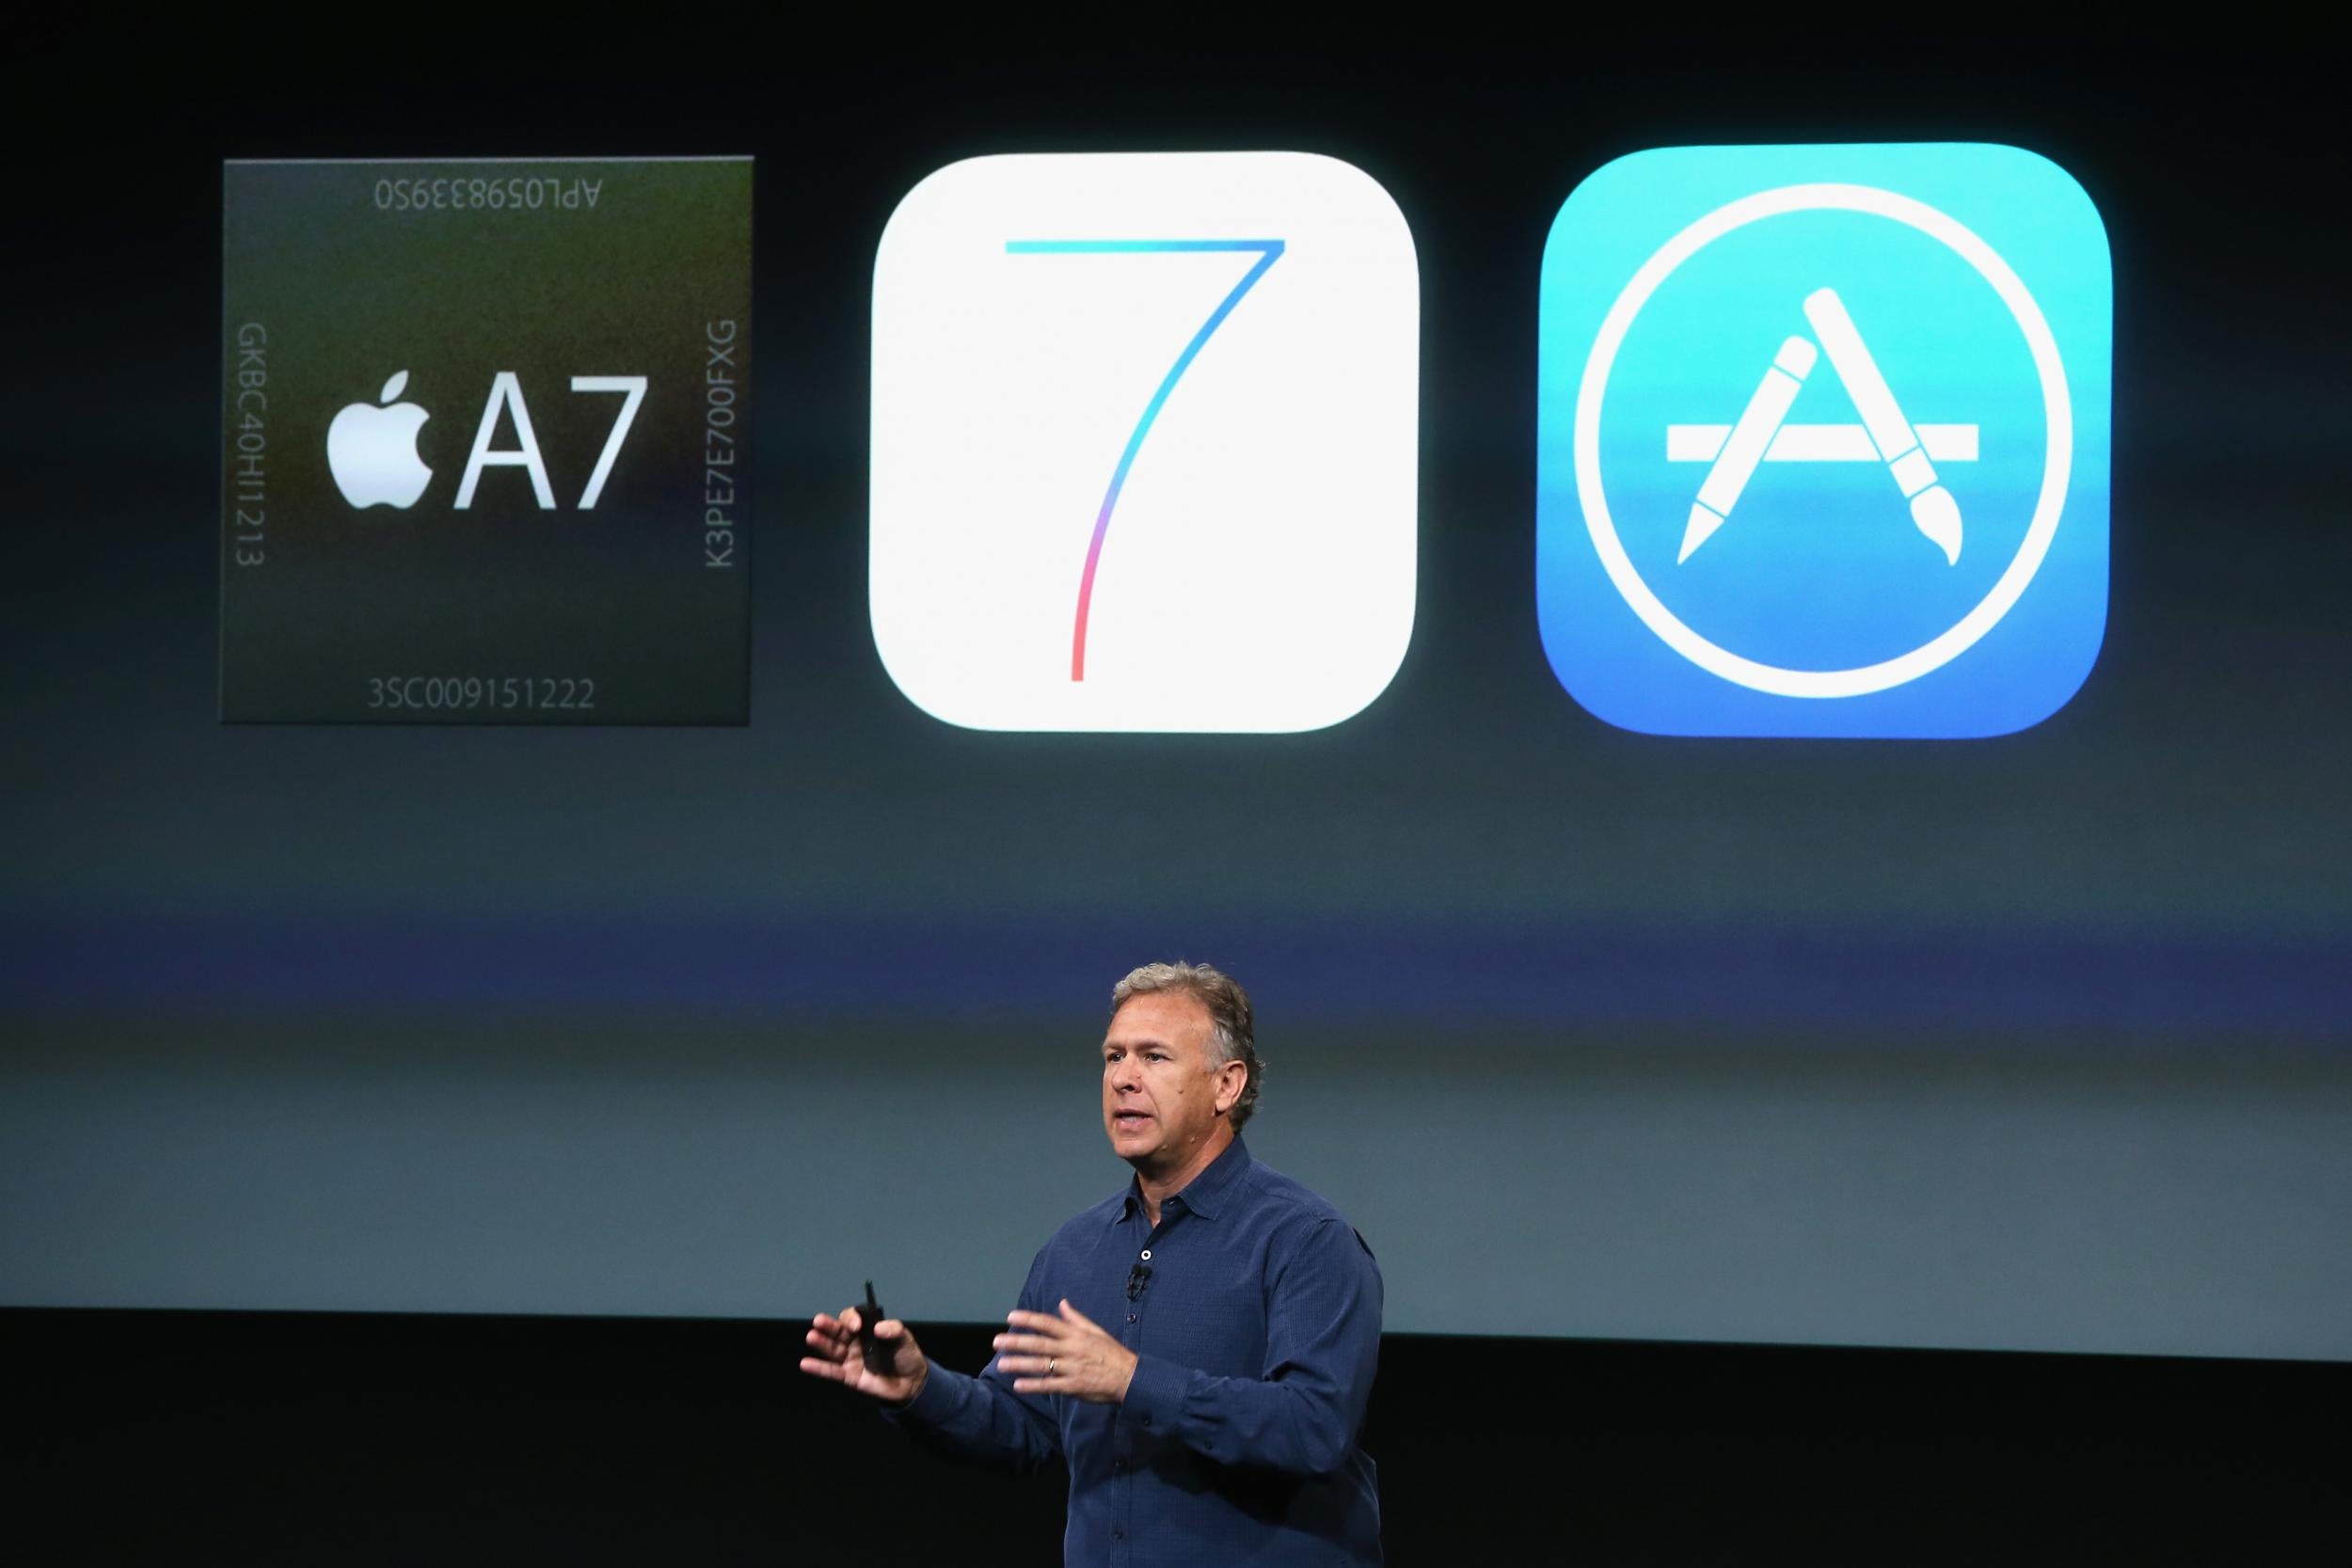 Apple Senior Vice President of Worldwide Marketing at Phil Schiller talks about the A7 chip, which contains the patented technology